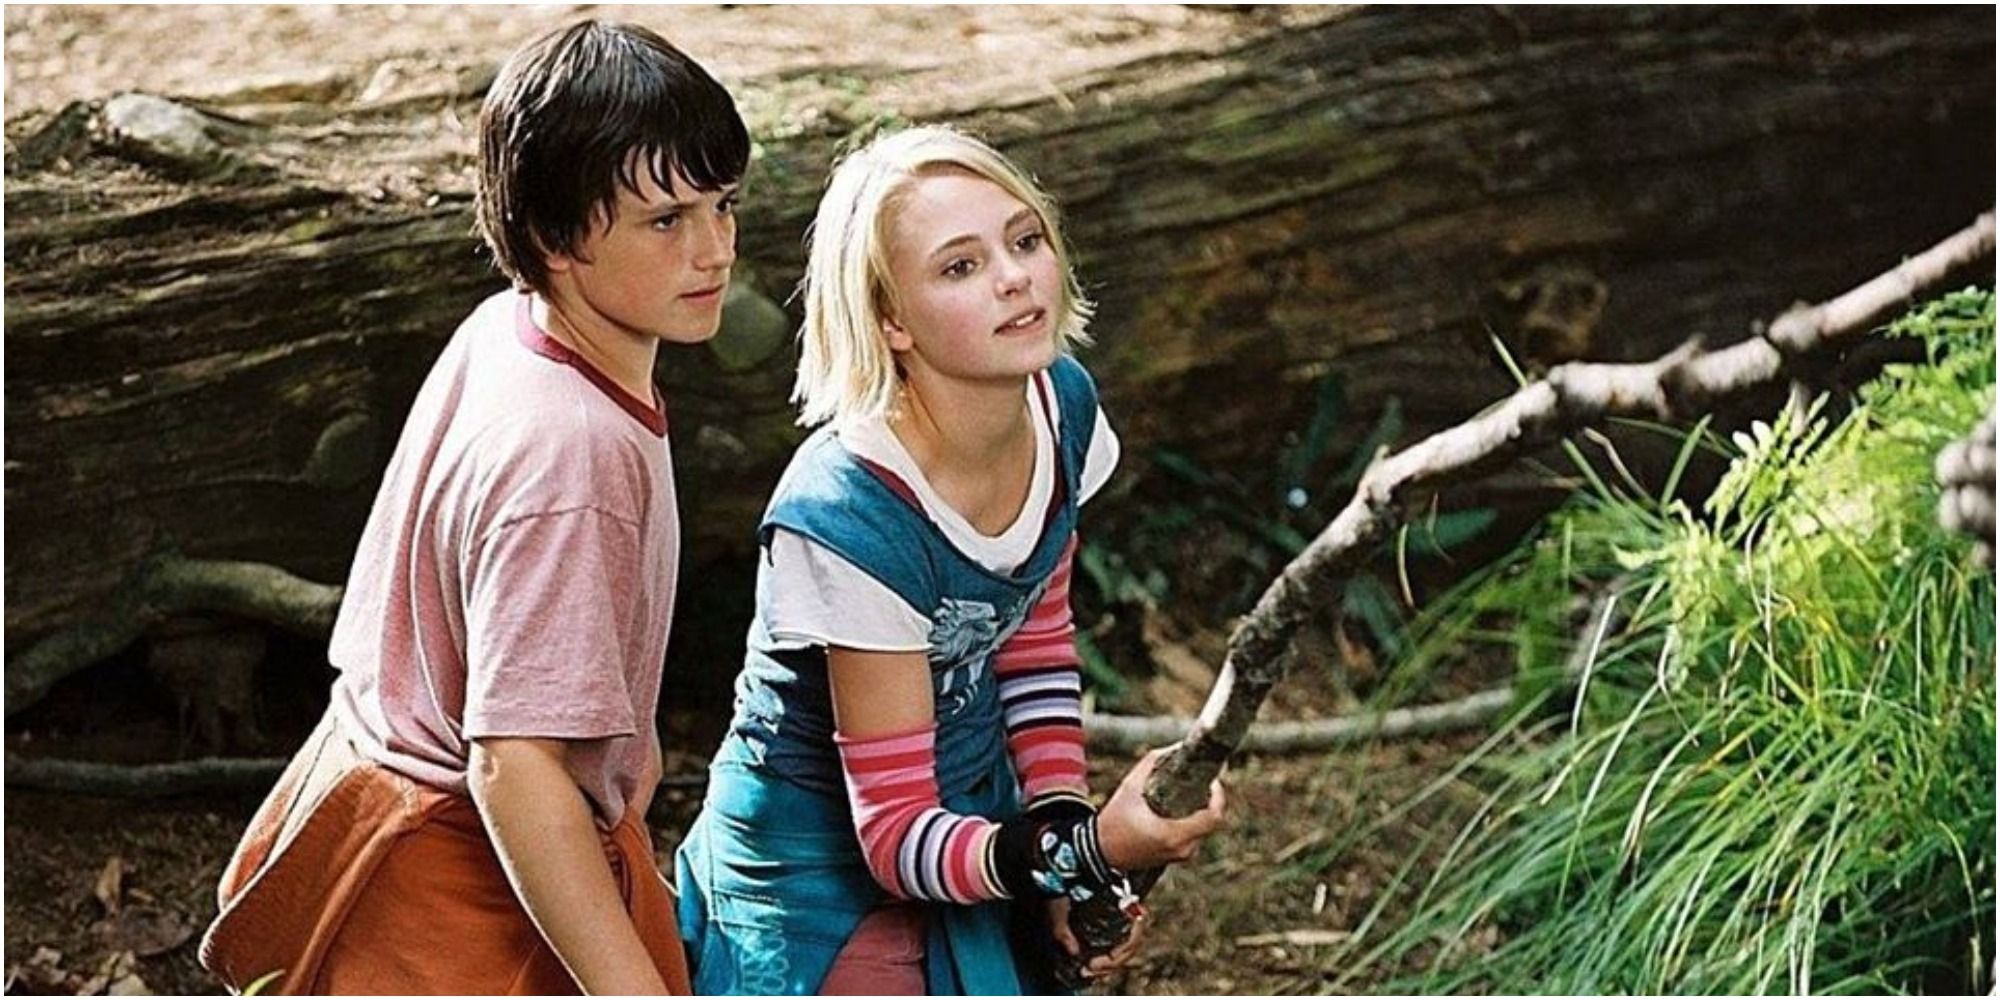 Hutcherson and Robb exploring the woods in Bridge to Terabithia